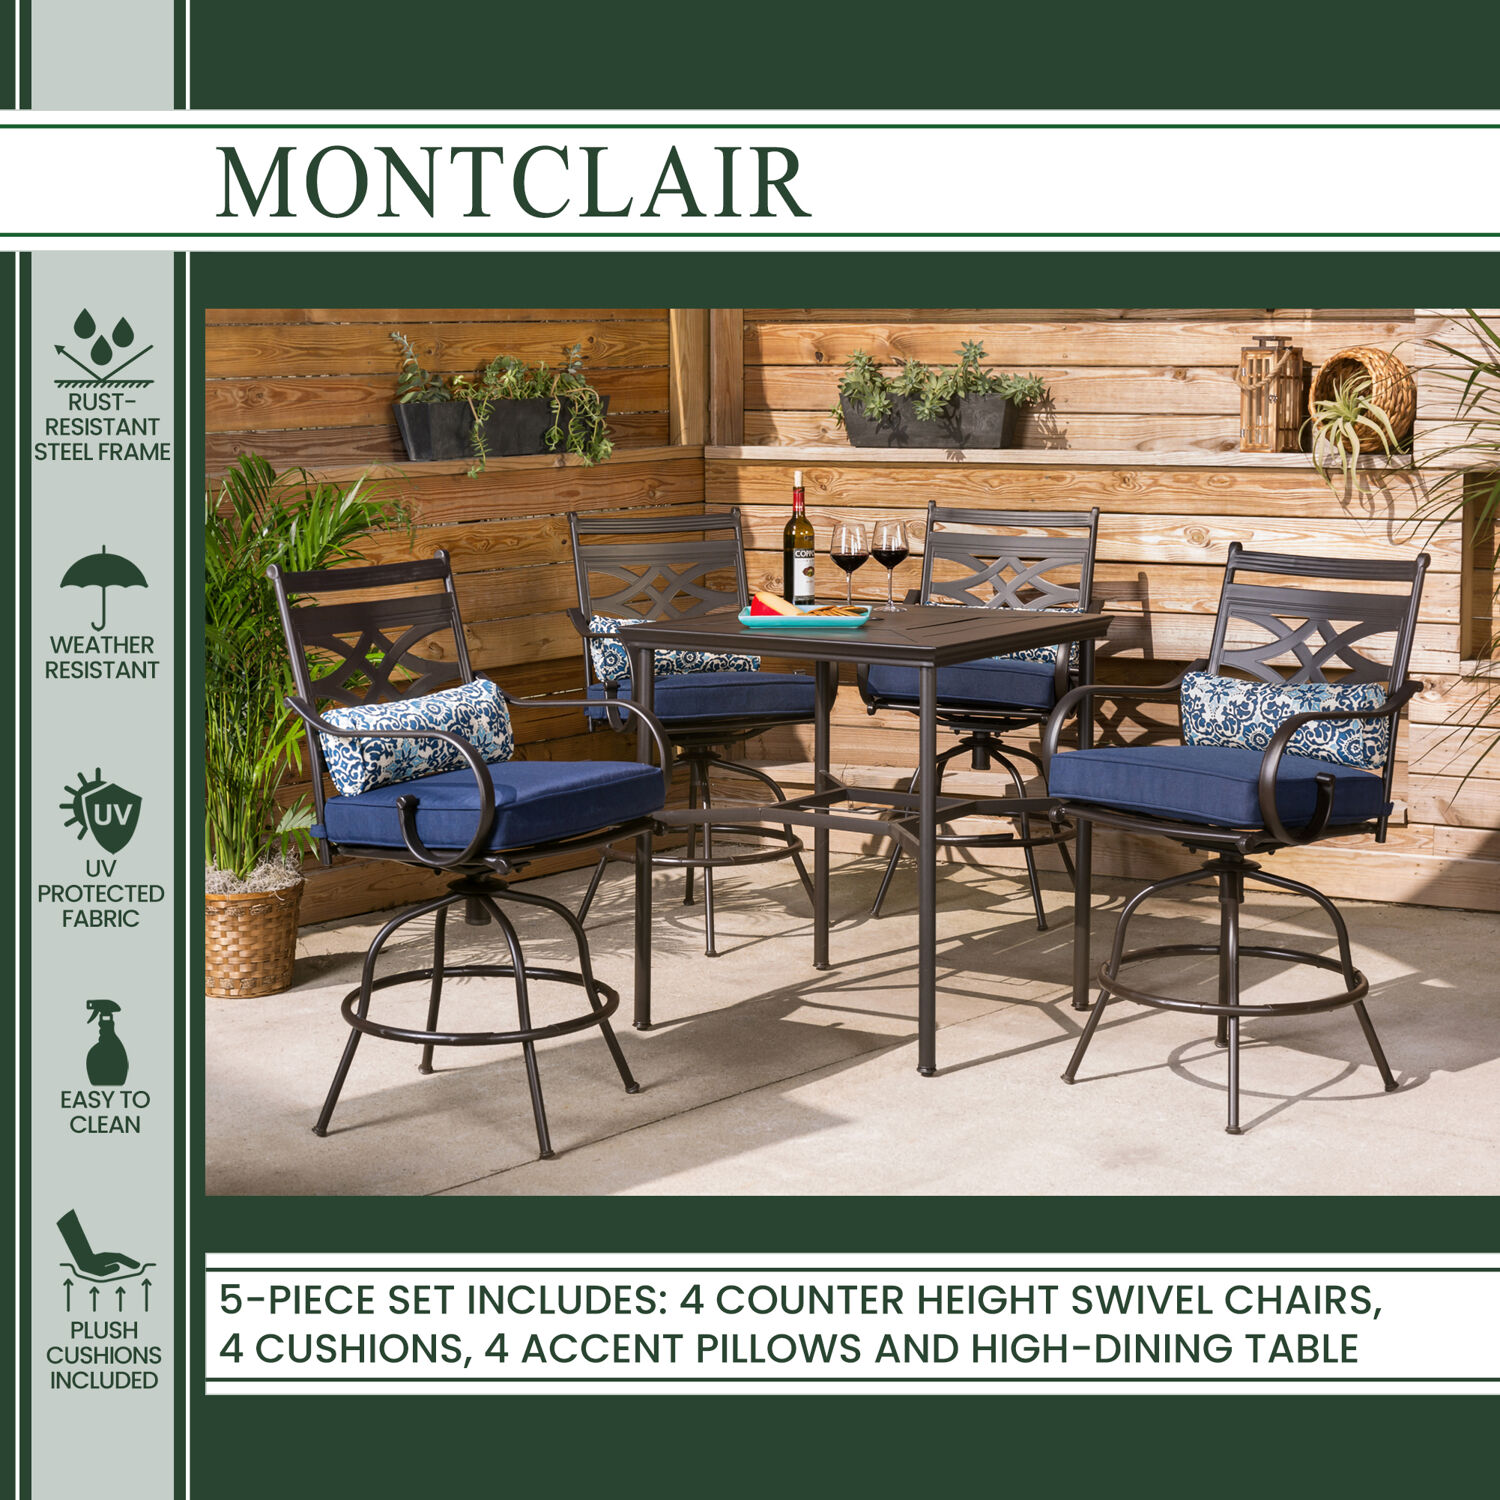 Hanover Montclair 5-Piece Steel Outdoor Counter-Height Dining Set with Chairs and Table, Seats 4 - image 5 of 12